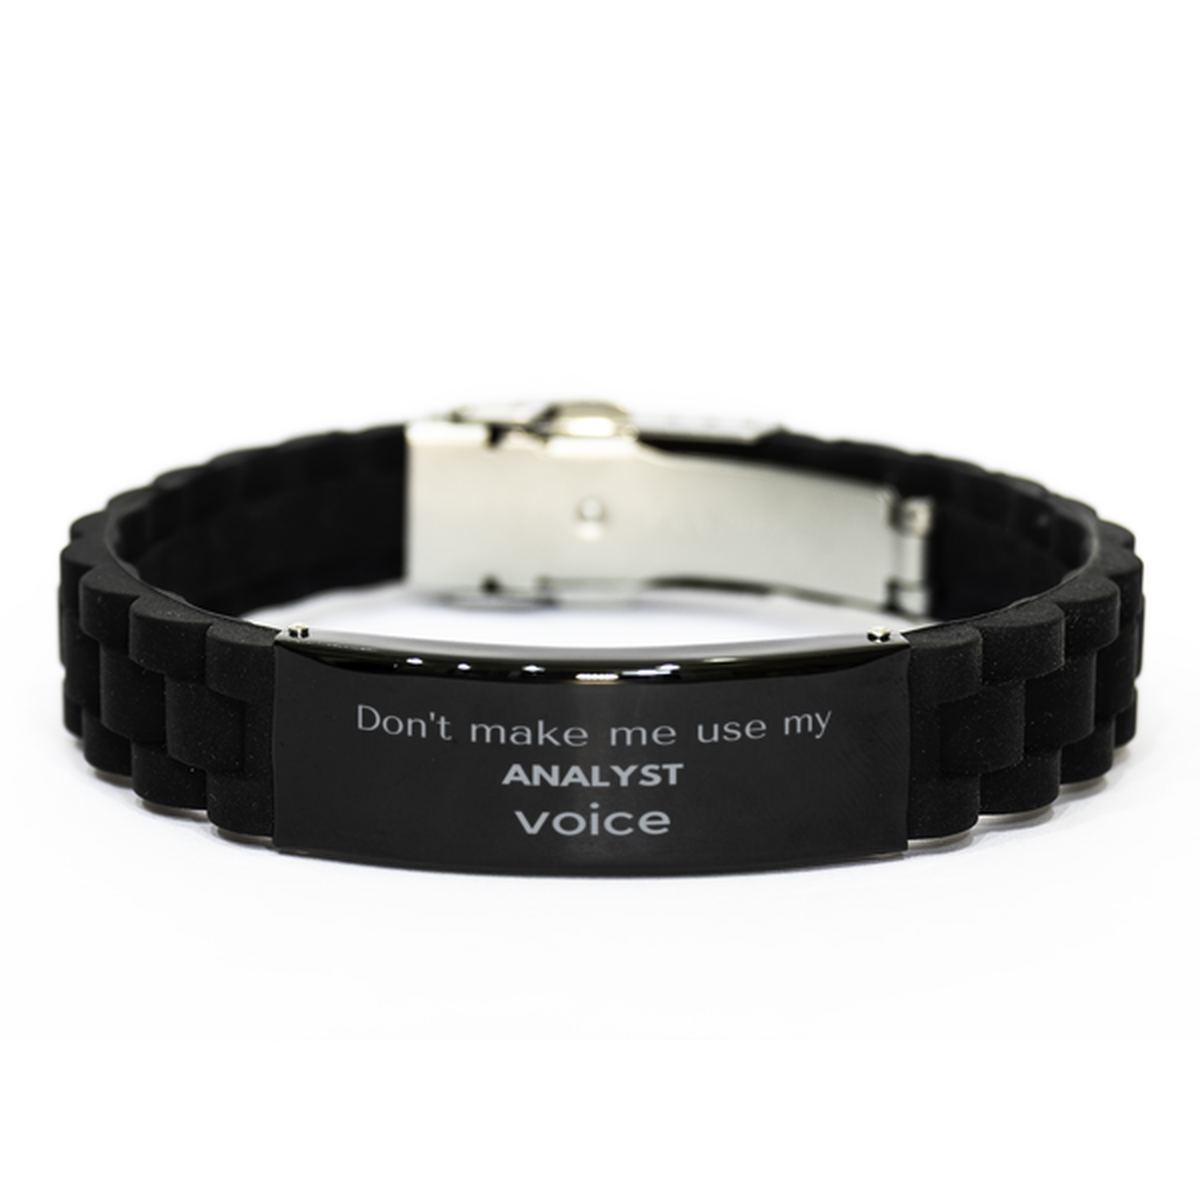 Don't make me use my Analyst voice, Sarcasm Analyst Gifts, Christmas Analyst Black Glidelock Clasp Bracelet Birthday Unique Gifts For Analyst Coworkers, Men, Women, Colleague, Friends